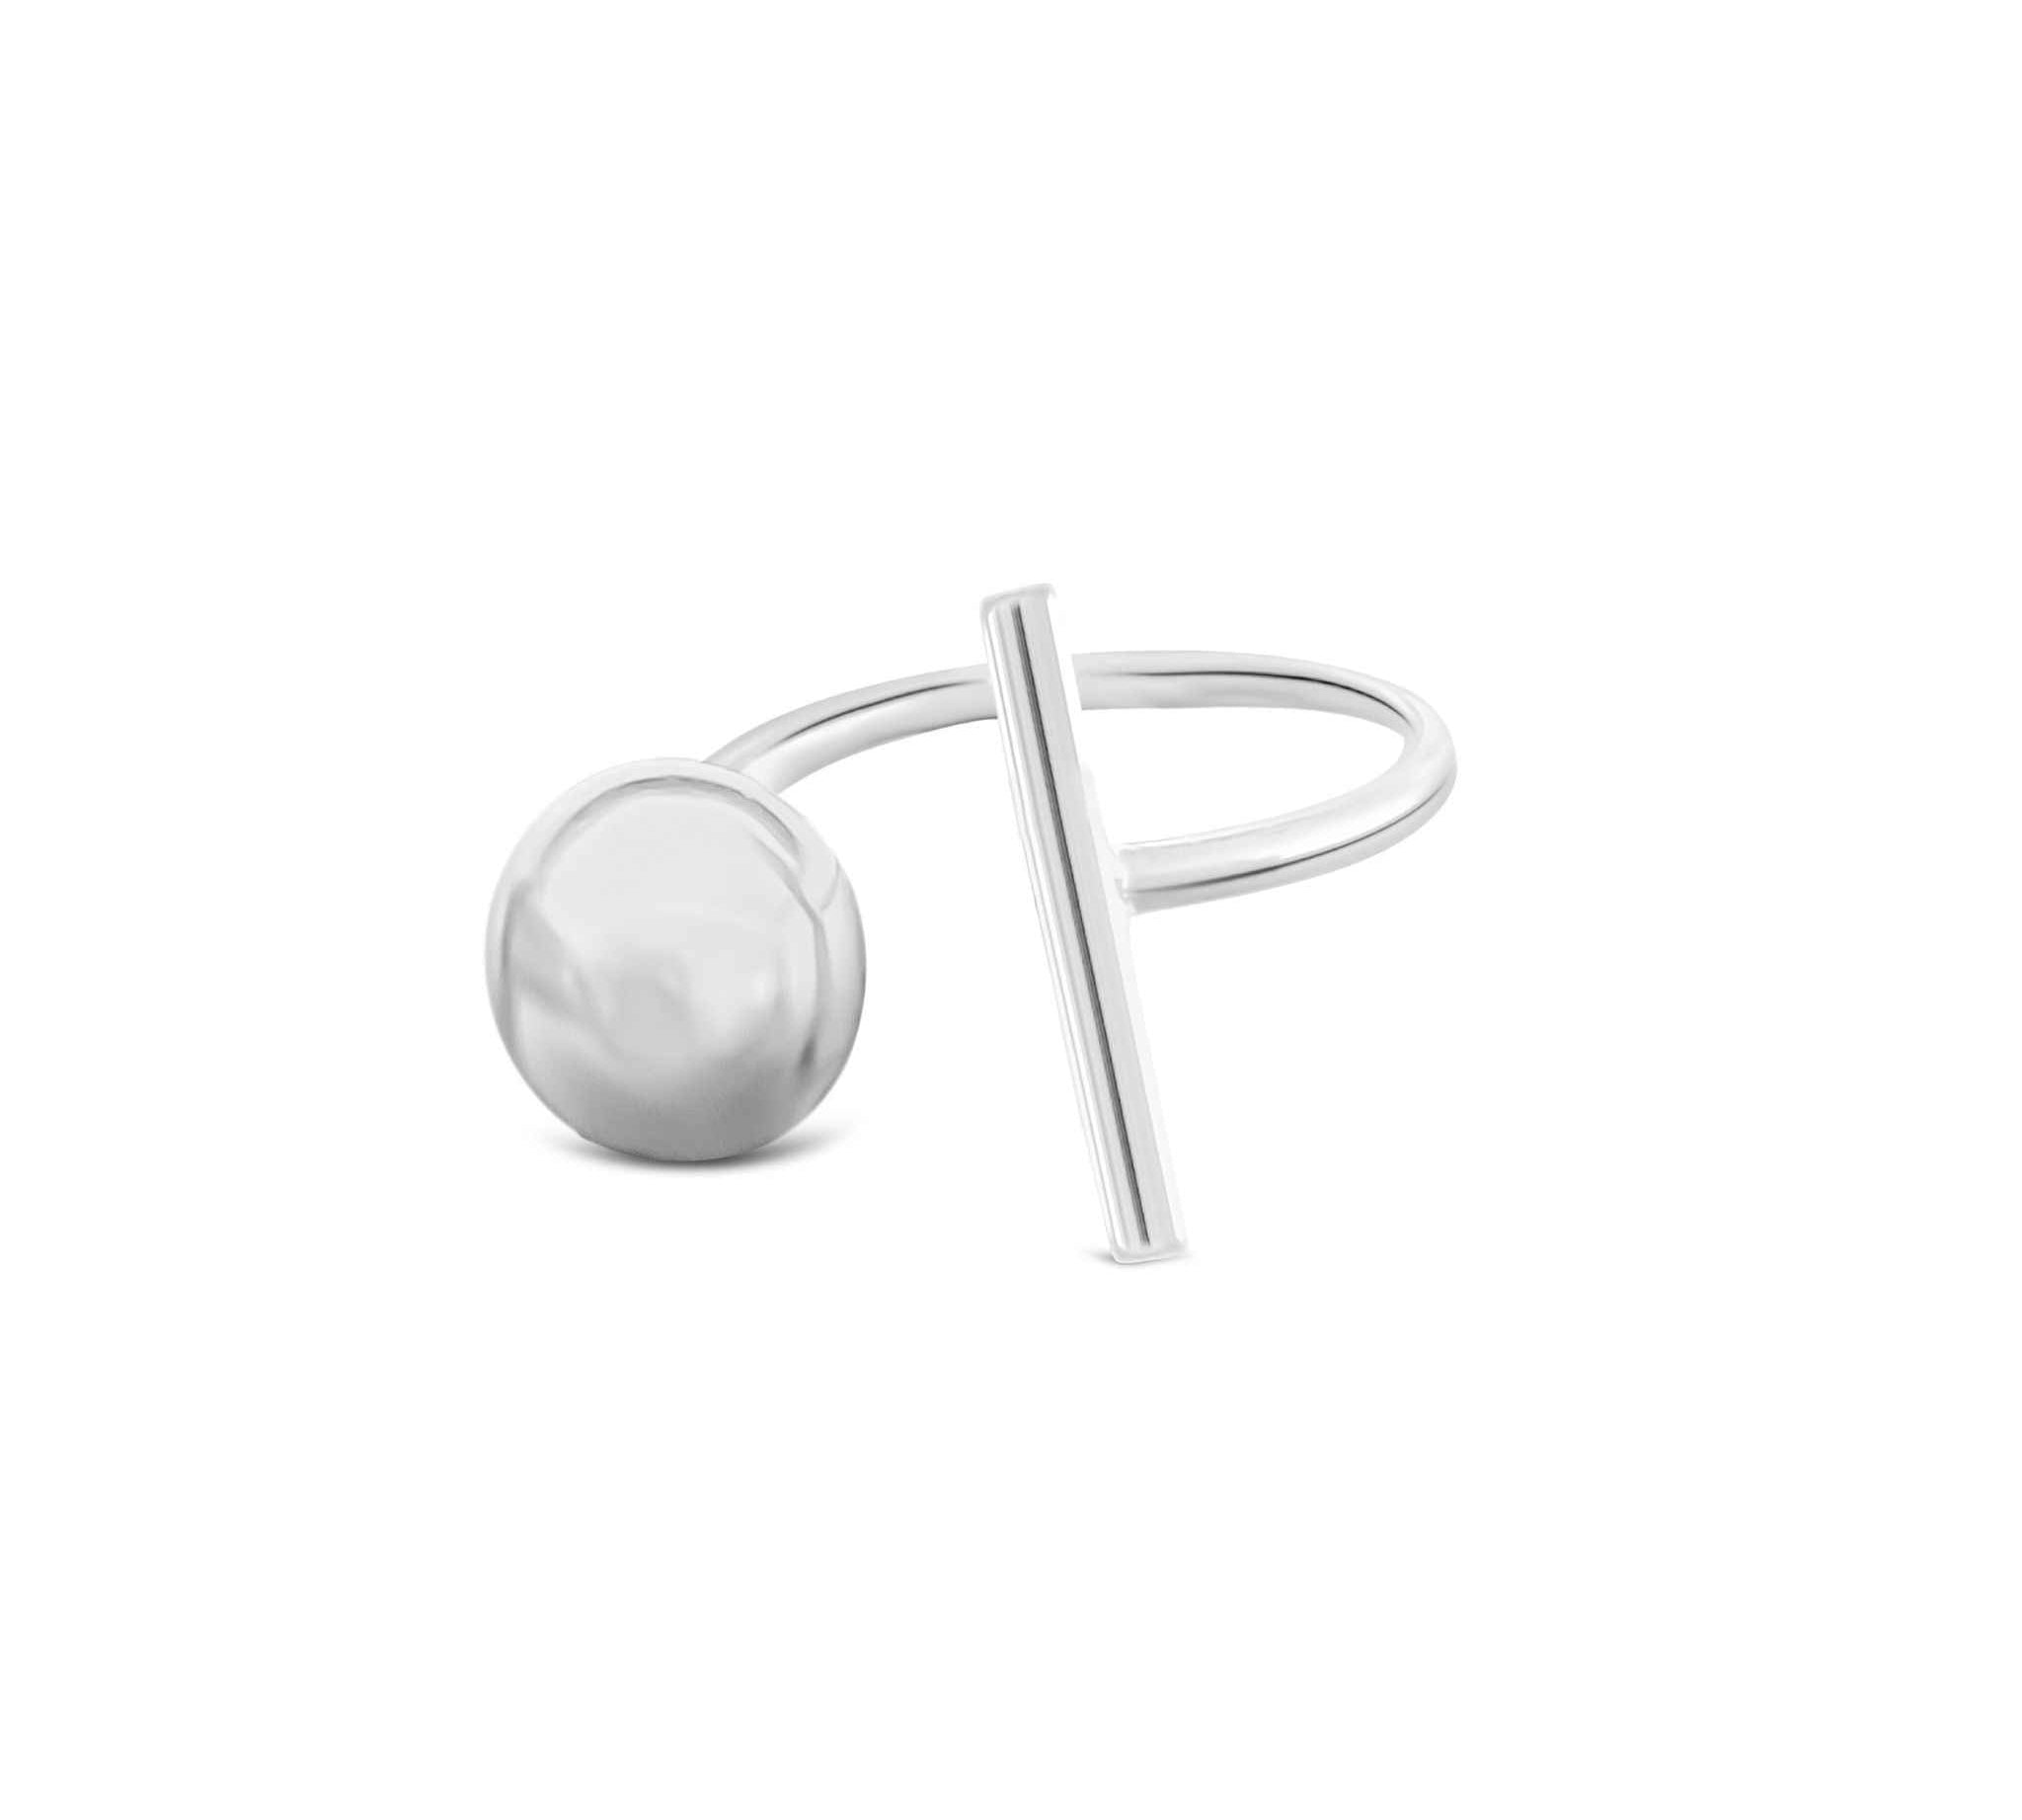 Elegant T-Bar Ring in Silver by Alessandra James, perfect for minimalist jewelry lovers. Ideal for everyday wear.